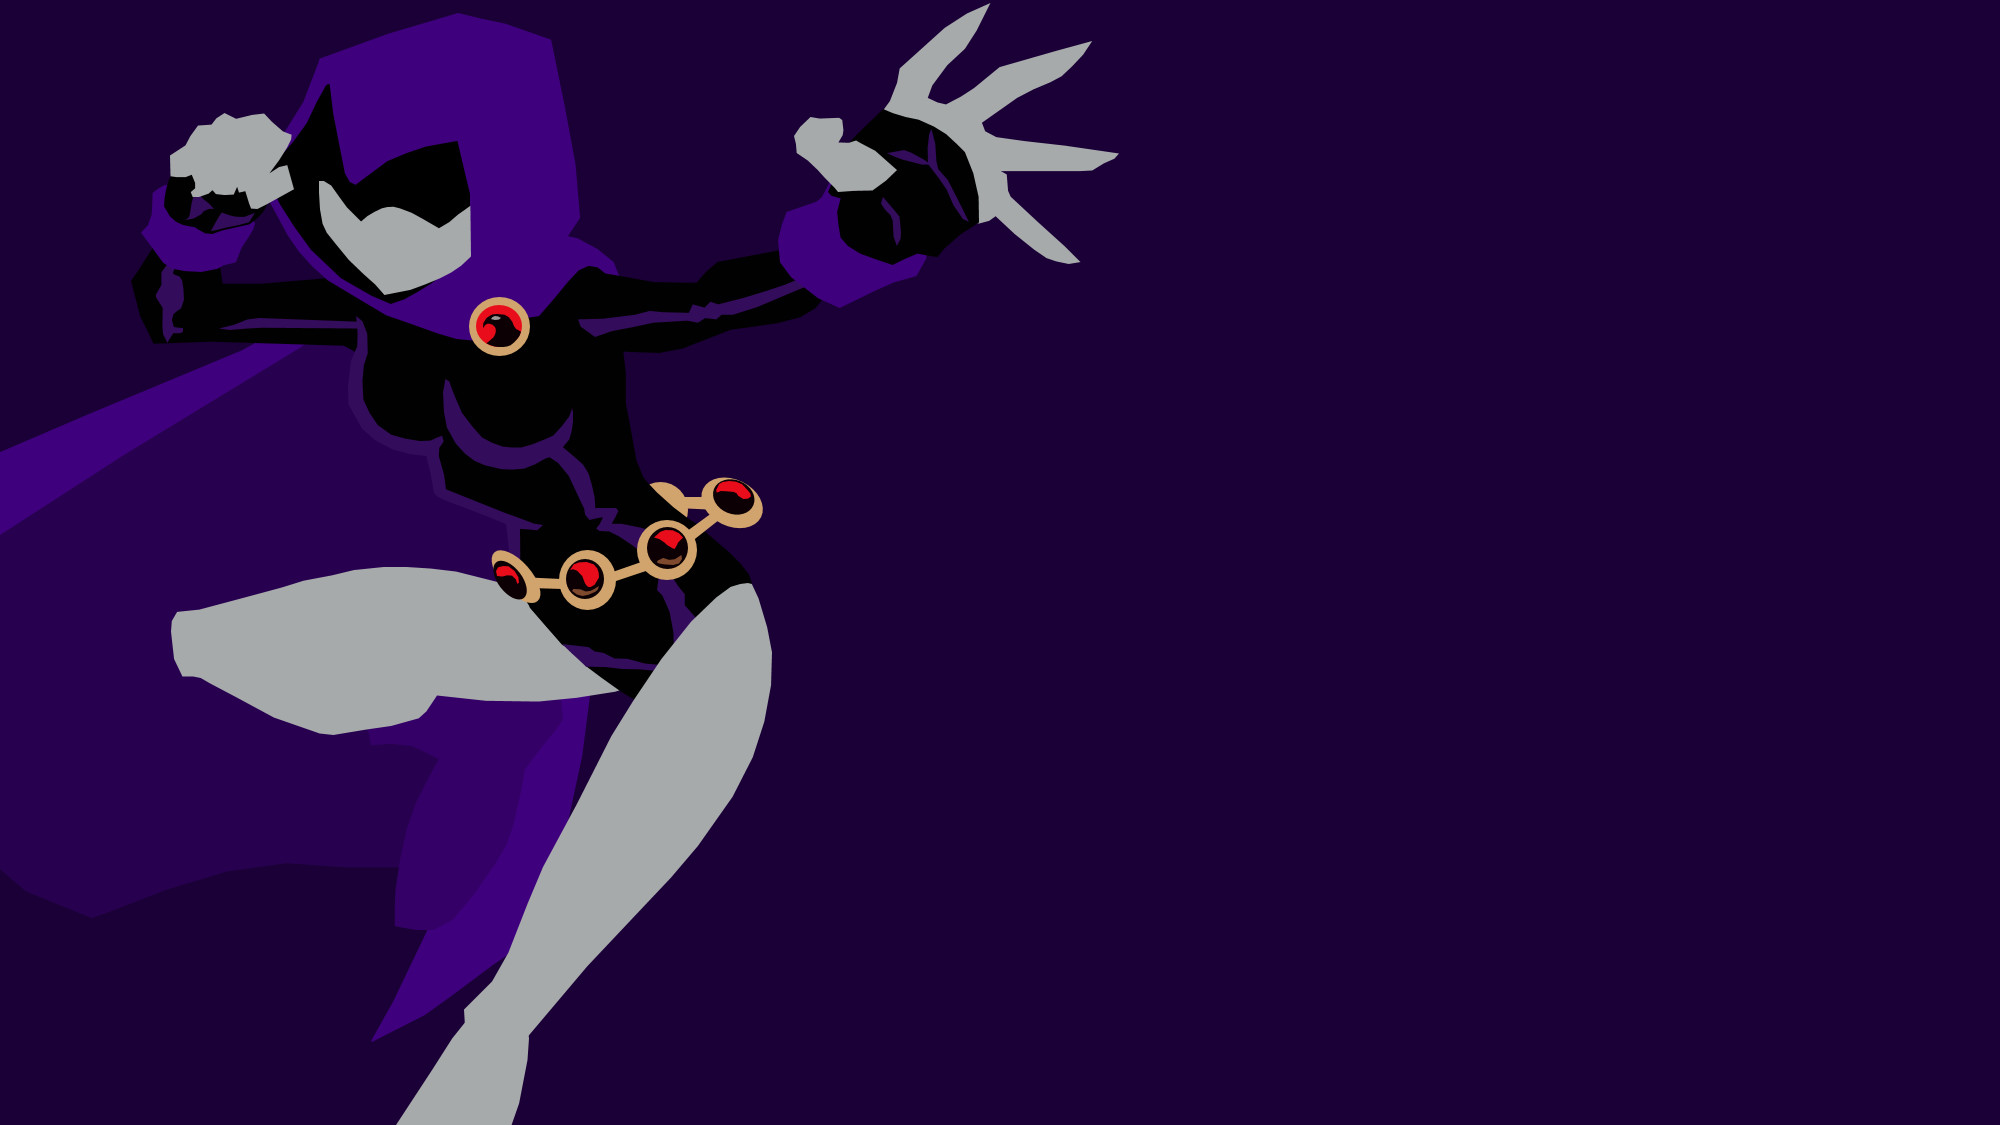 2000x1125 Raven from Teen Titans by Reverendtundra Raven from Teen Titans by  Reverendtundra